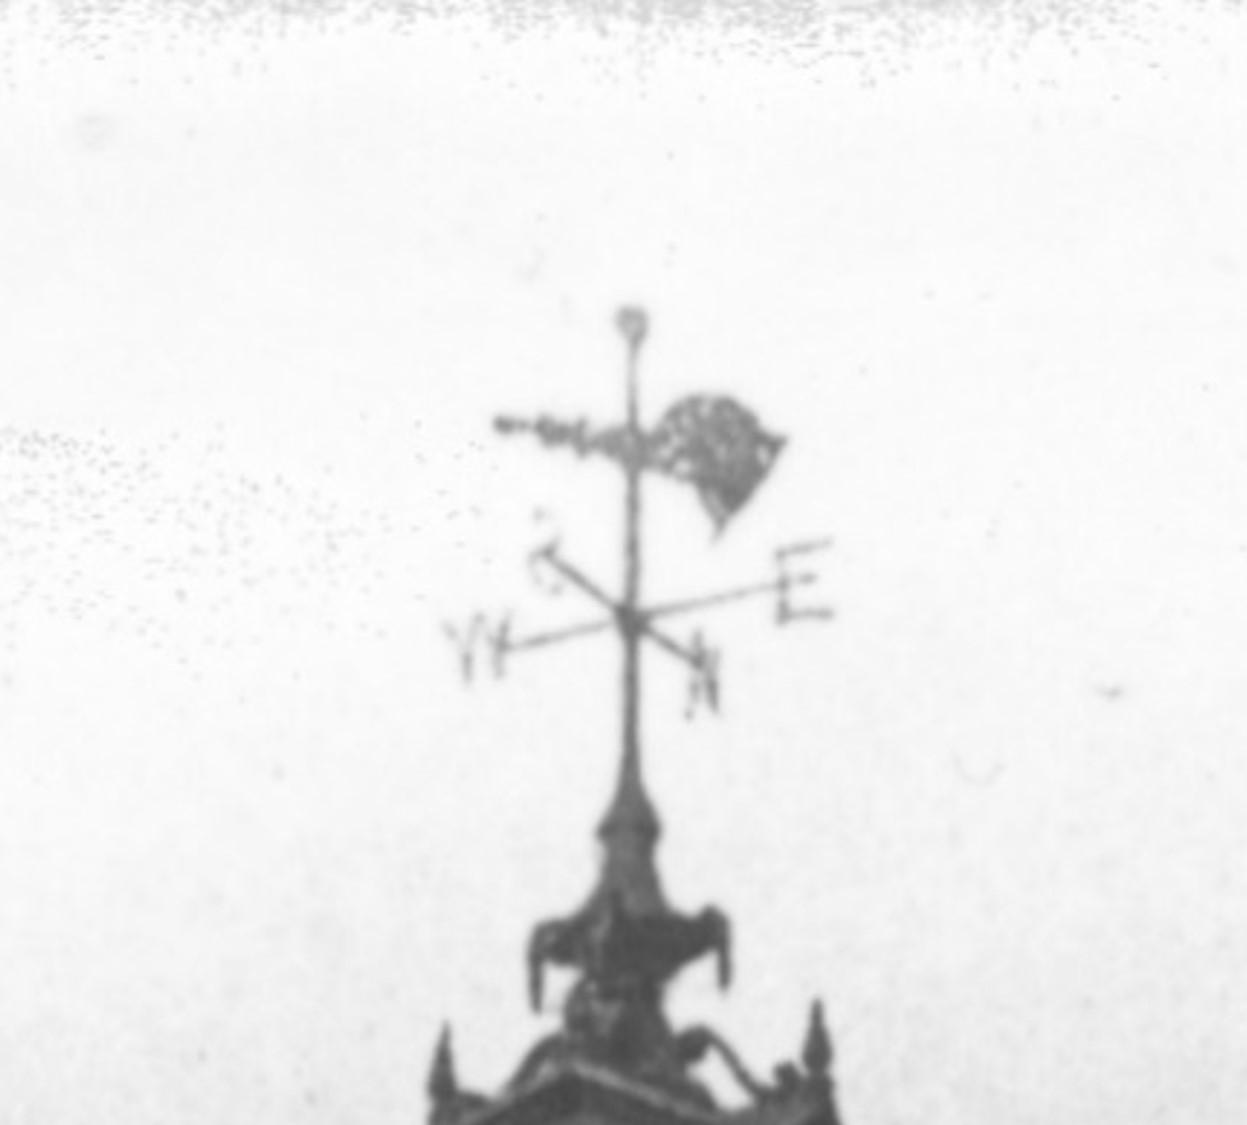 Close up of a section of a black and white photograph showing the lamps on the sides of an historic clock.